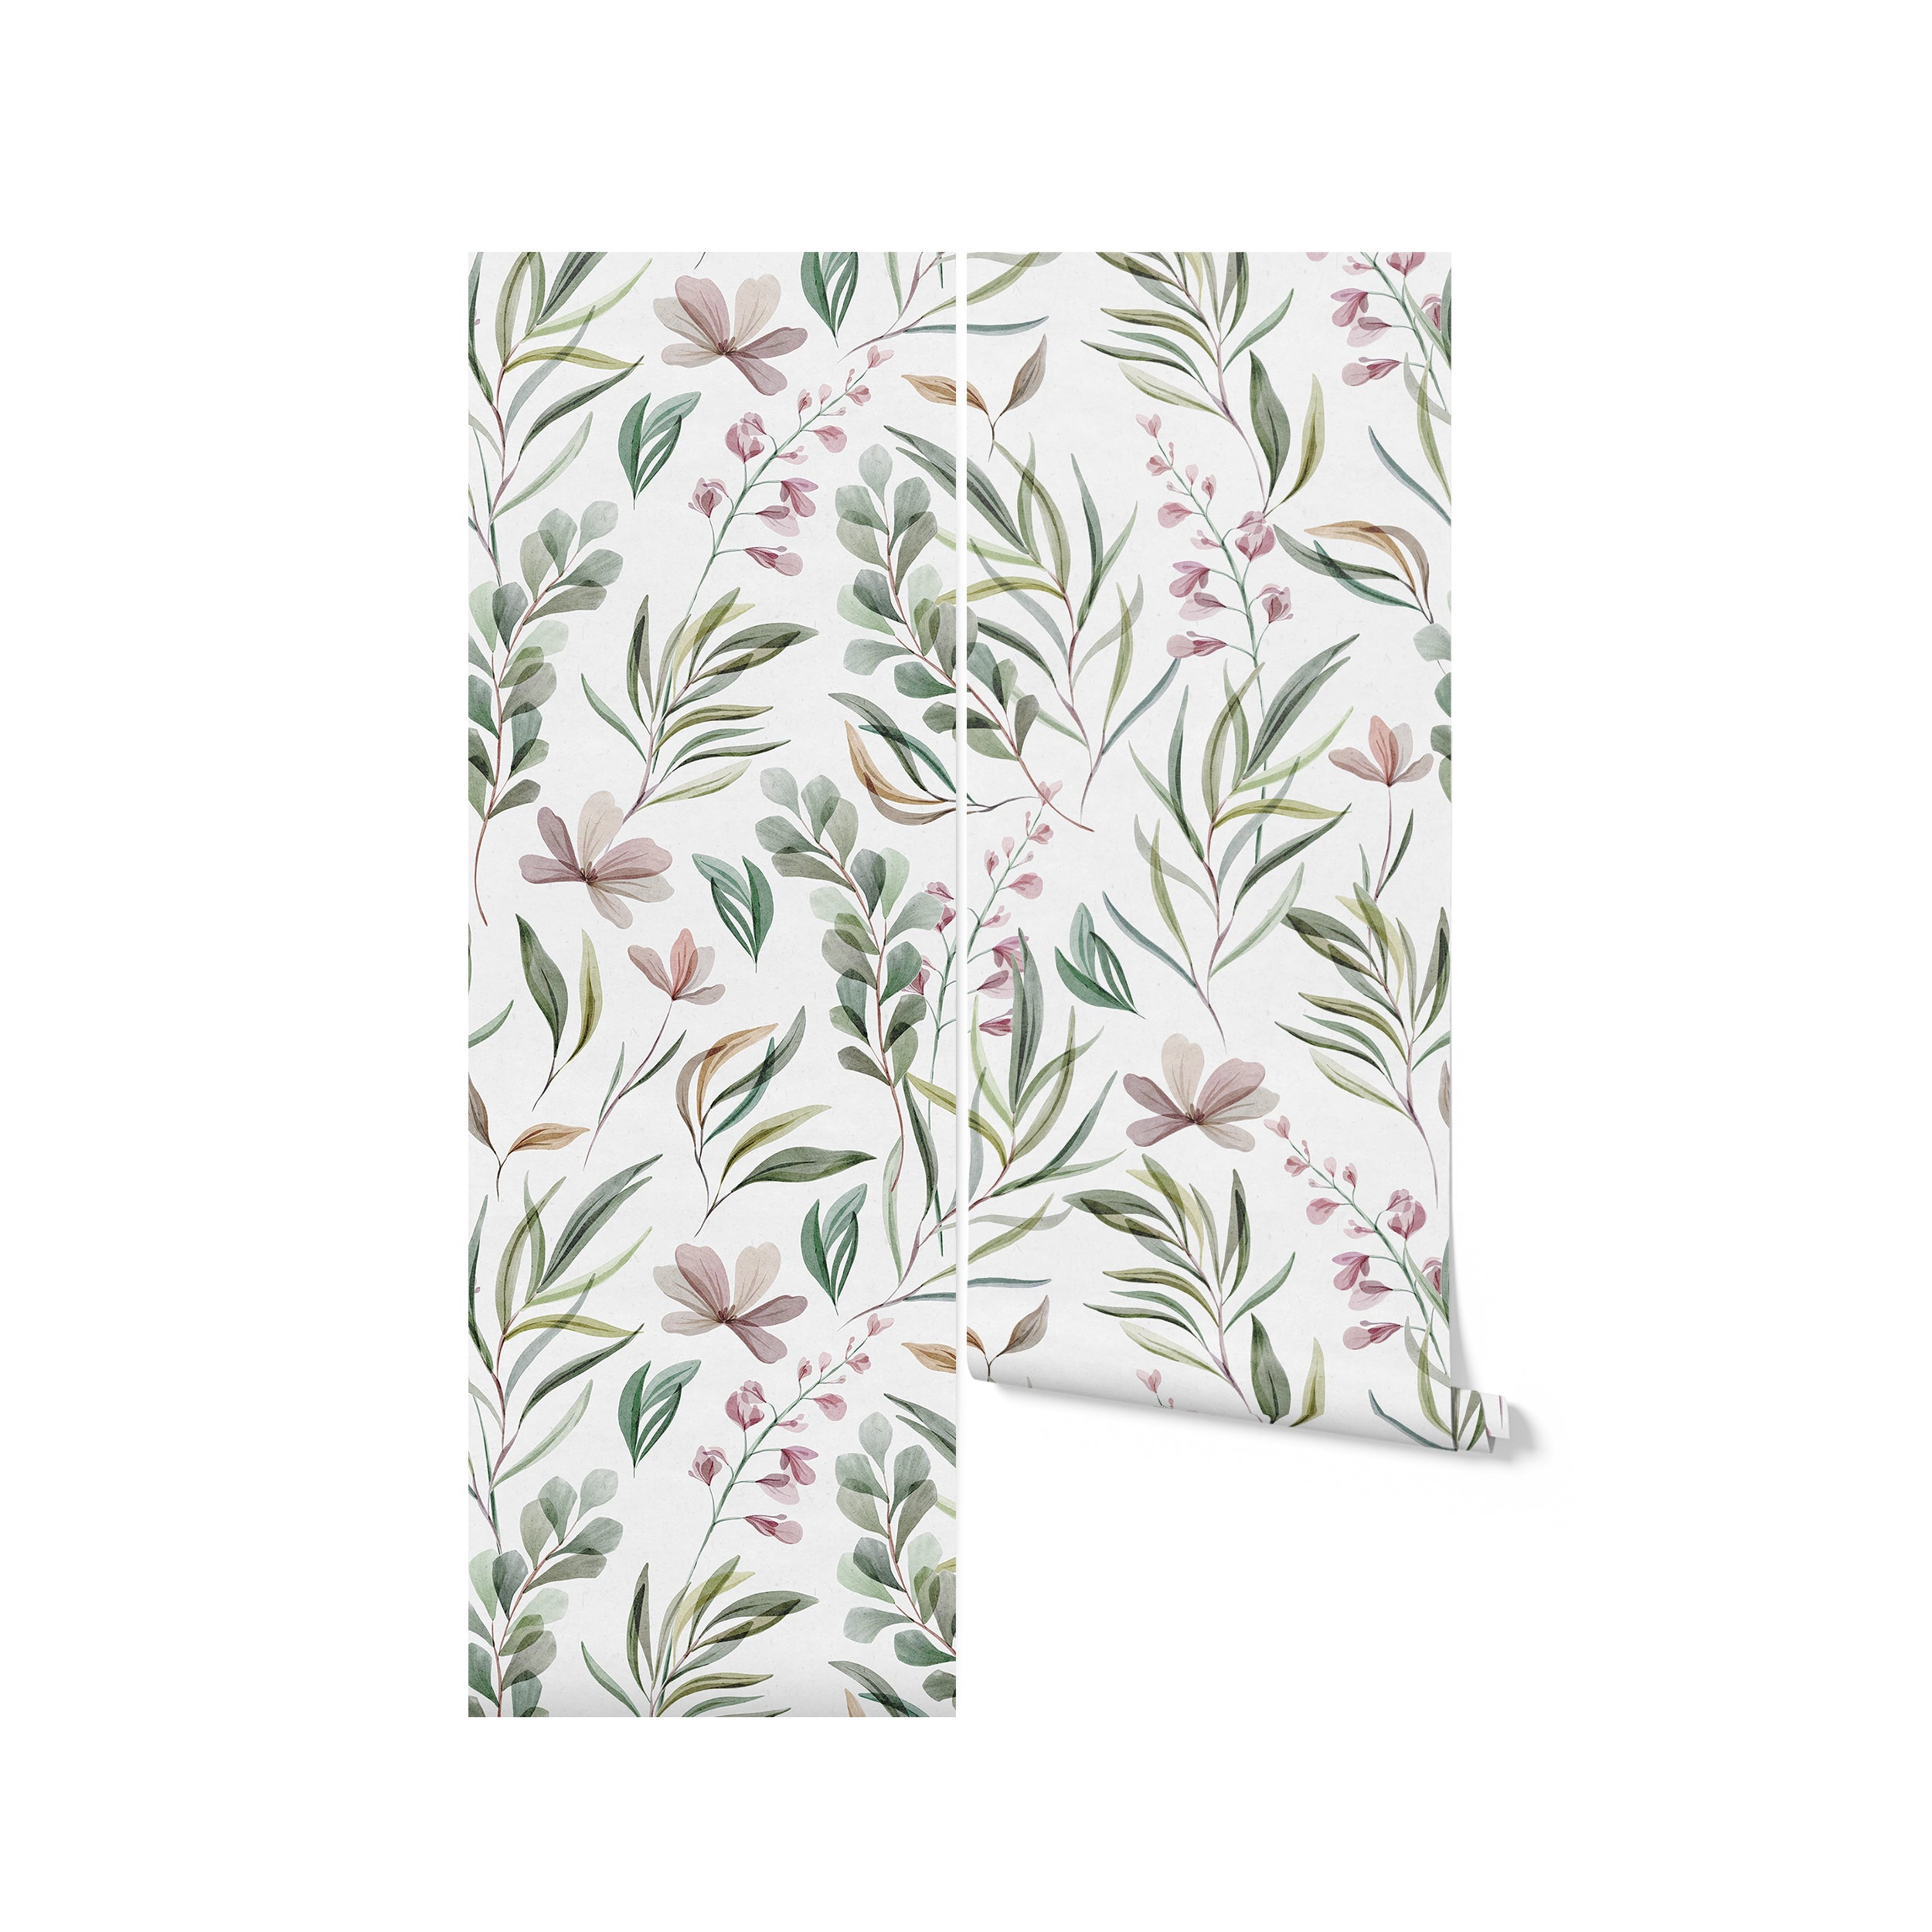 Detailed view of the Botanical Floral Wallpaper, showcasing its elegant design of intermingling leaves and delicate flowers painted in watercolor style, predominantly in shades of green, pink, and taupe against a light background.